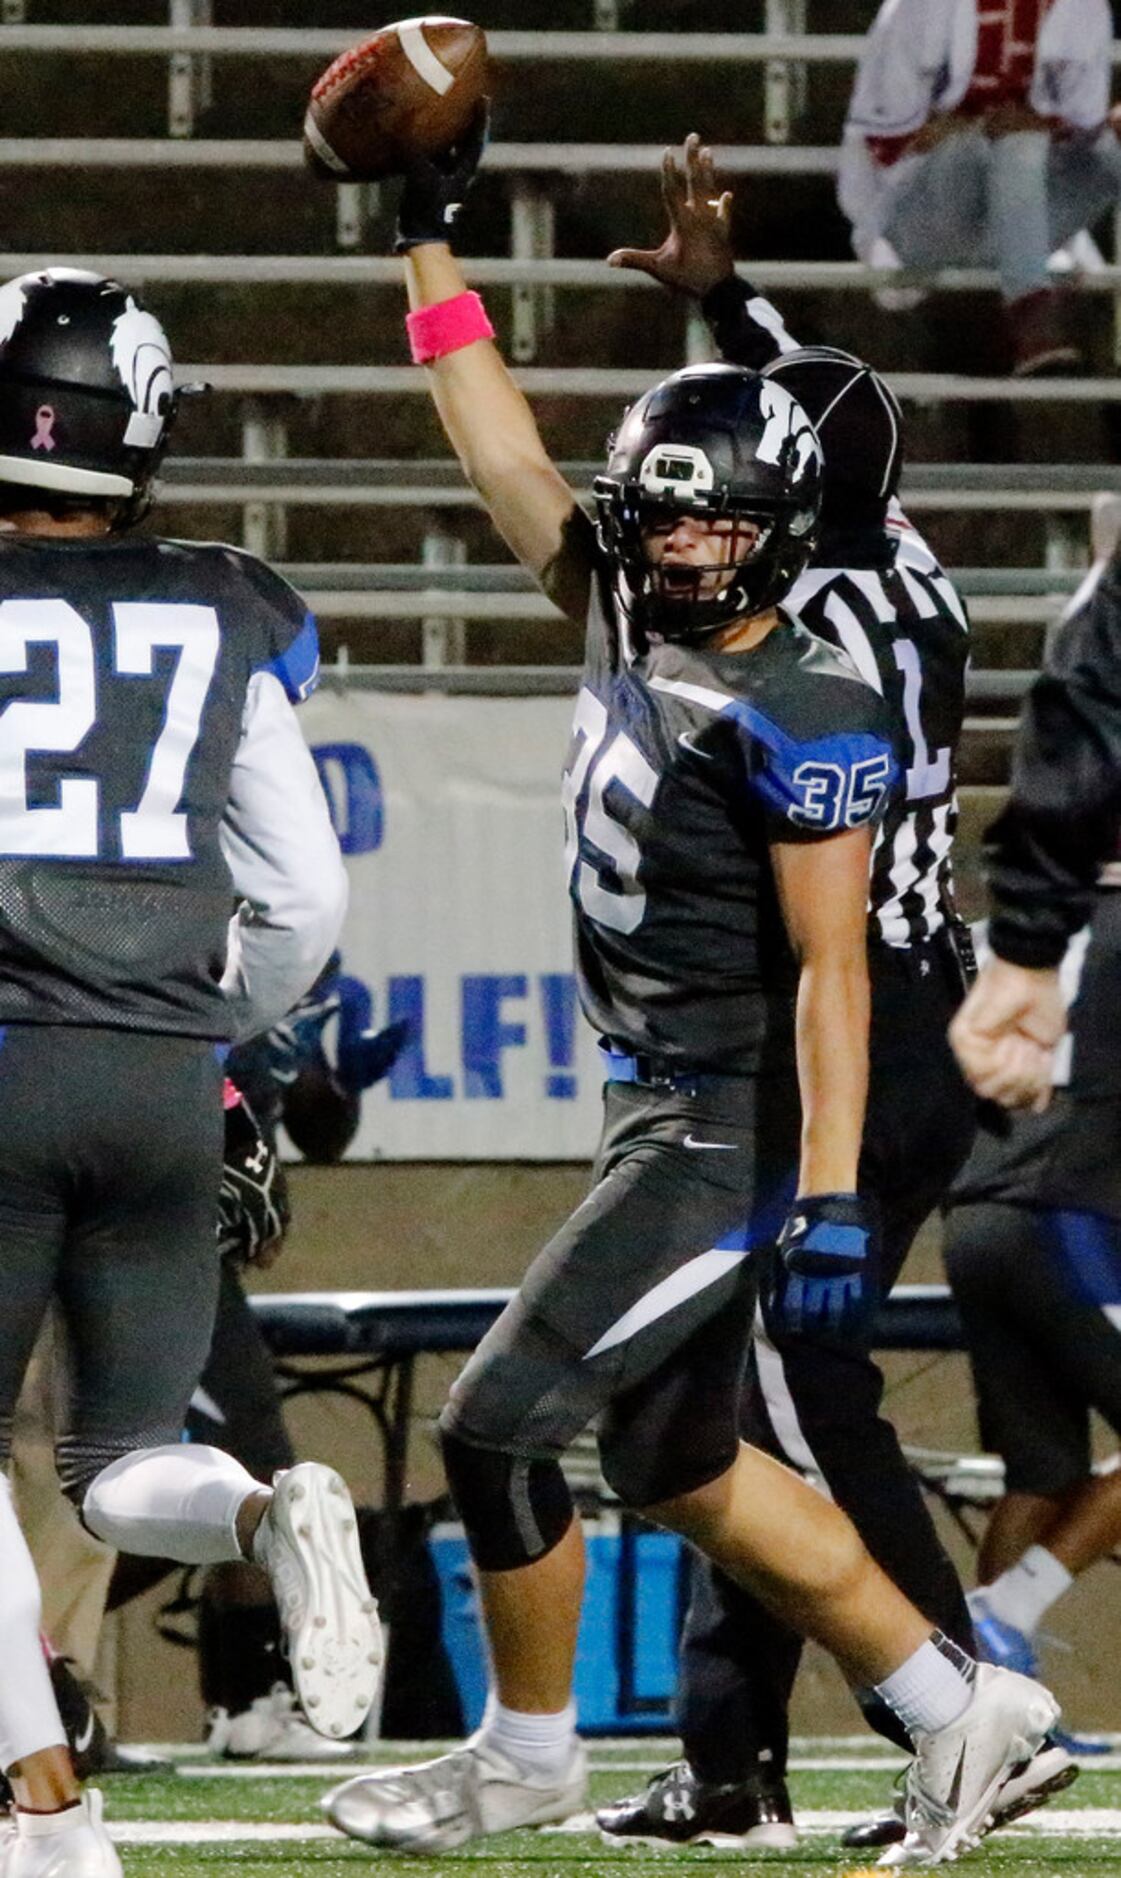 Plano West High School defensive back Cade Hathaway (35) hoists up the ball after he...